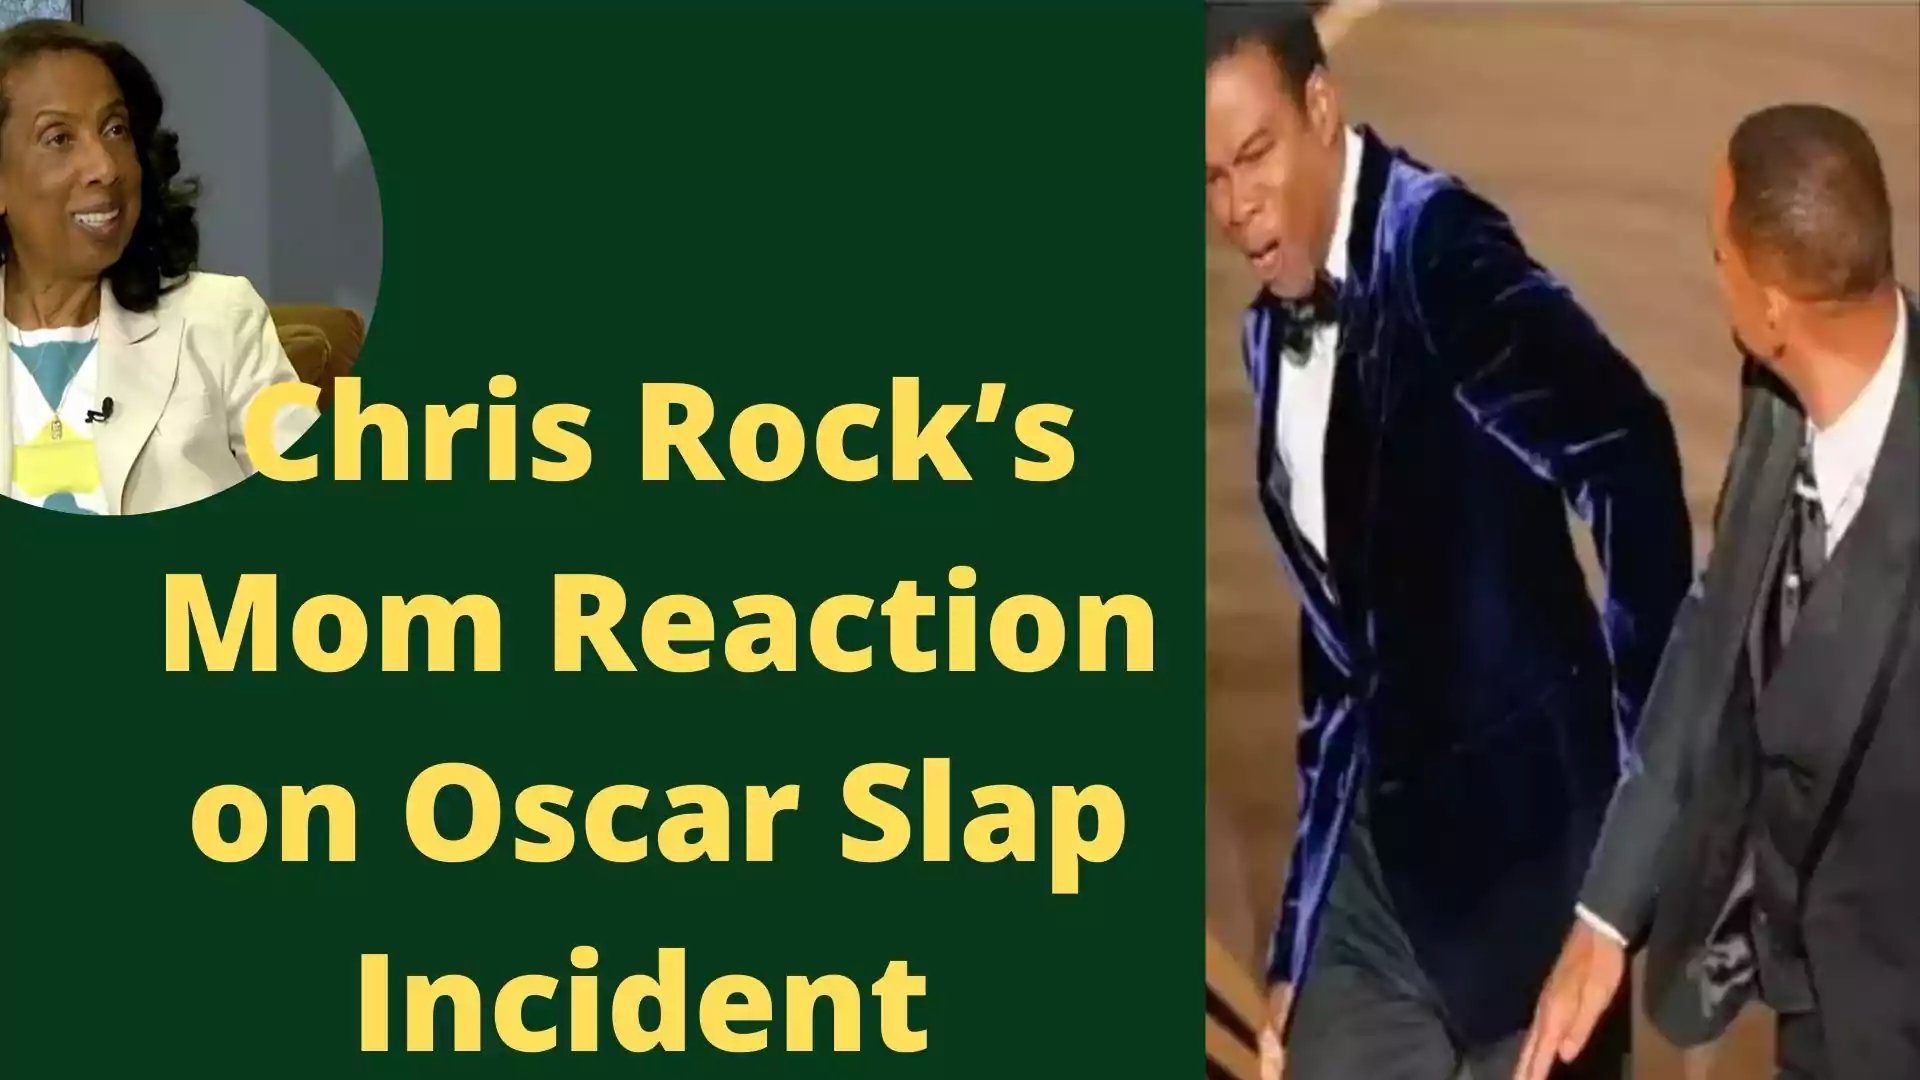 ‘When You Hurt My Child, You Hurt Me’: Chris Rock’s Mom on Oscar Incident. Chris Rock’s Mom Reaction on Oscar Incident. What Cris mom said.